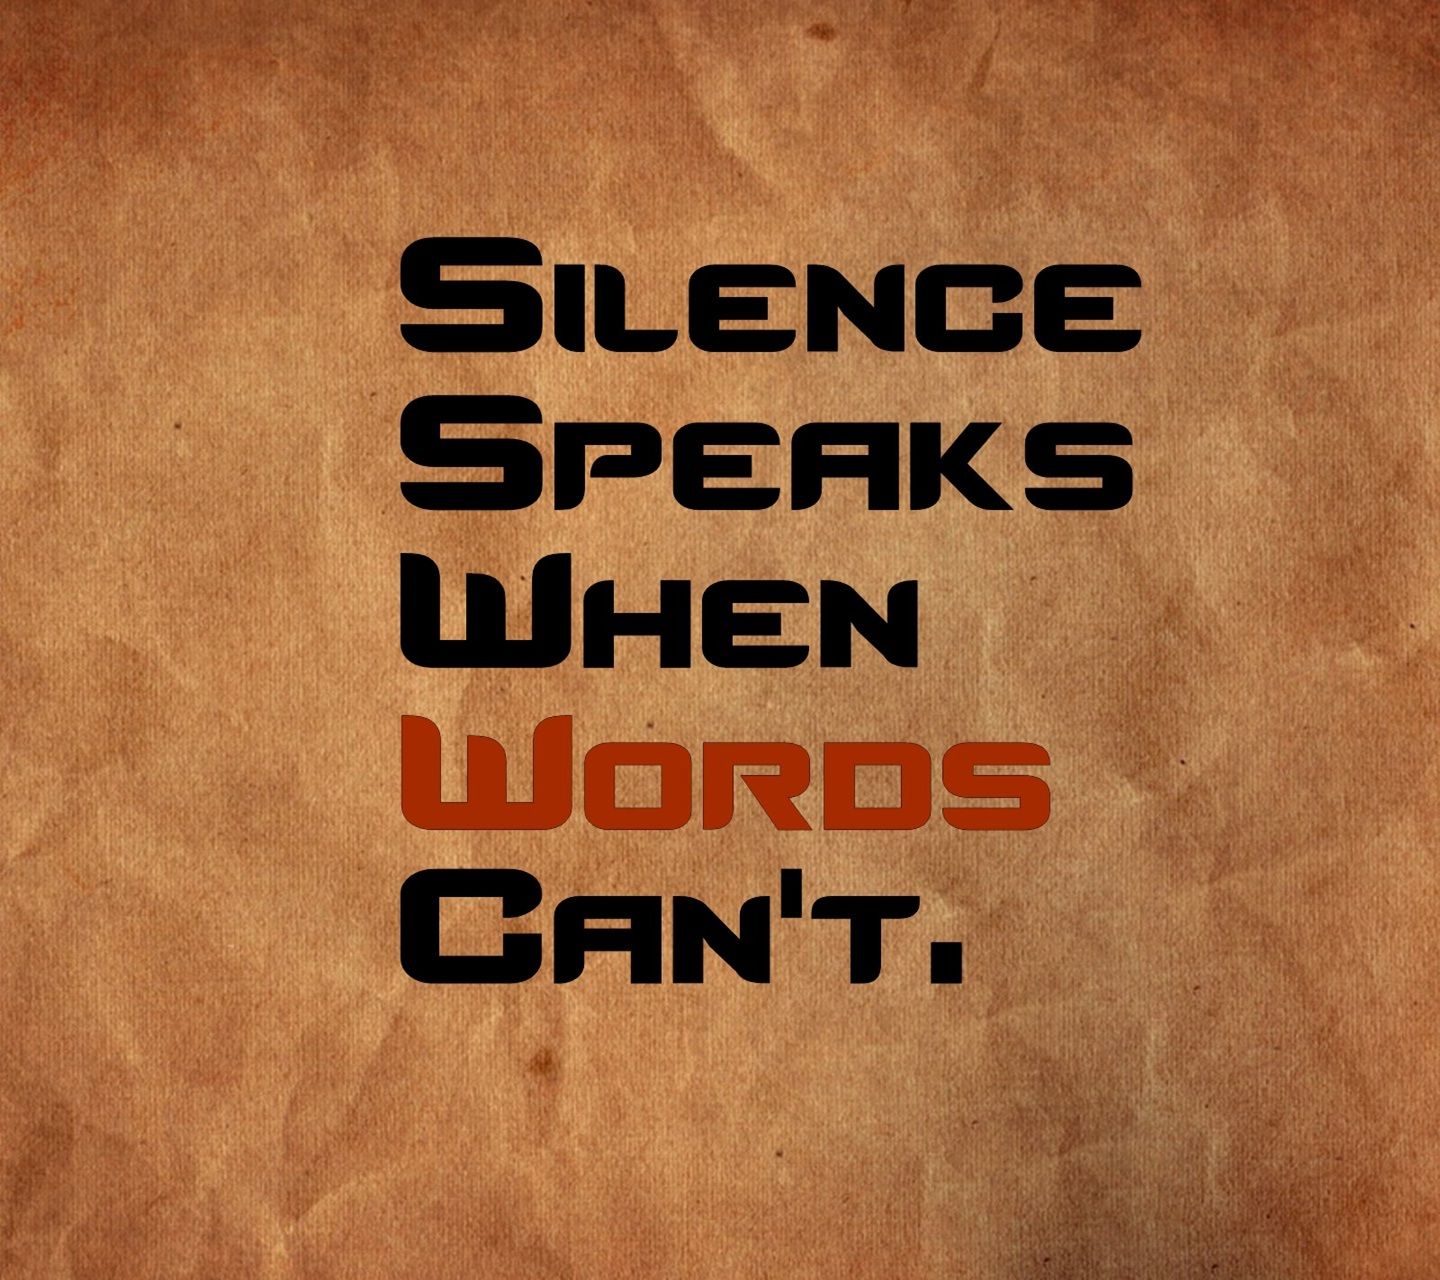 Silence Quotes Wallpapers - Wallpaper Cave